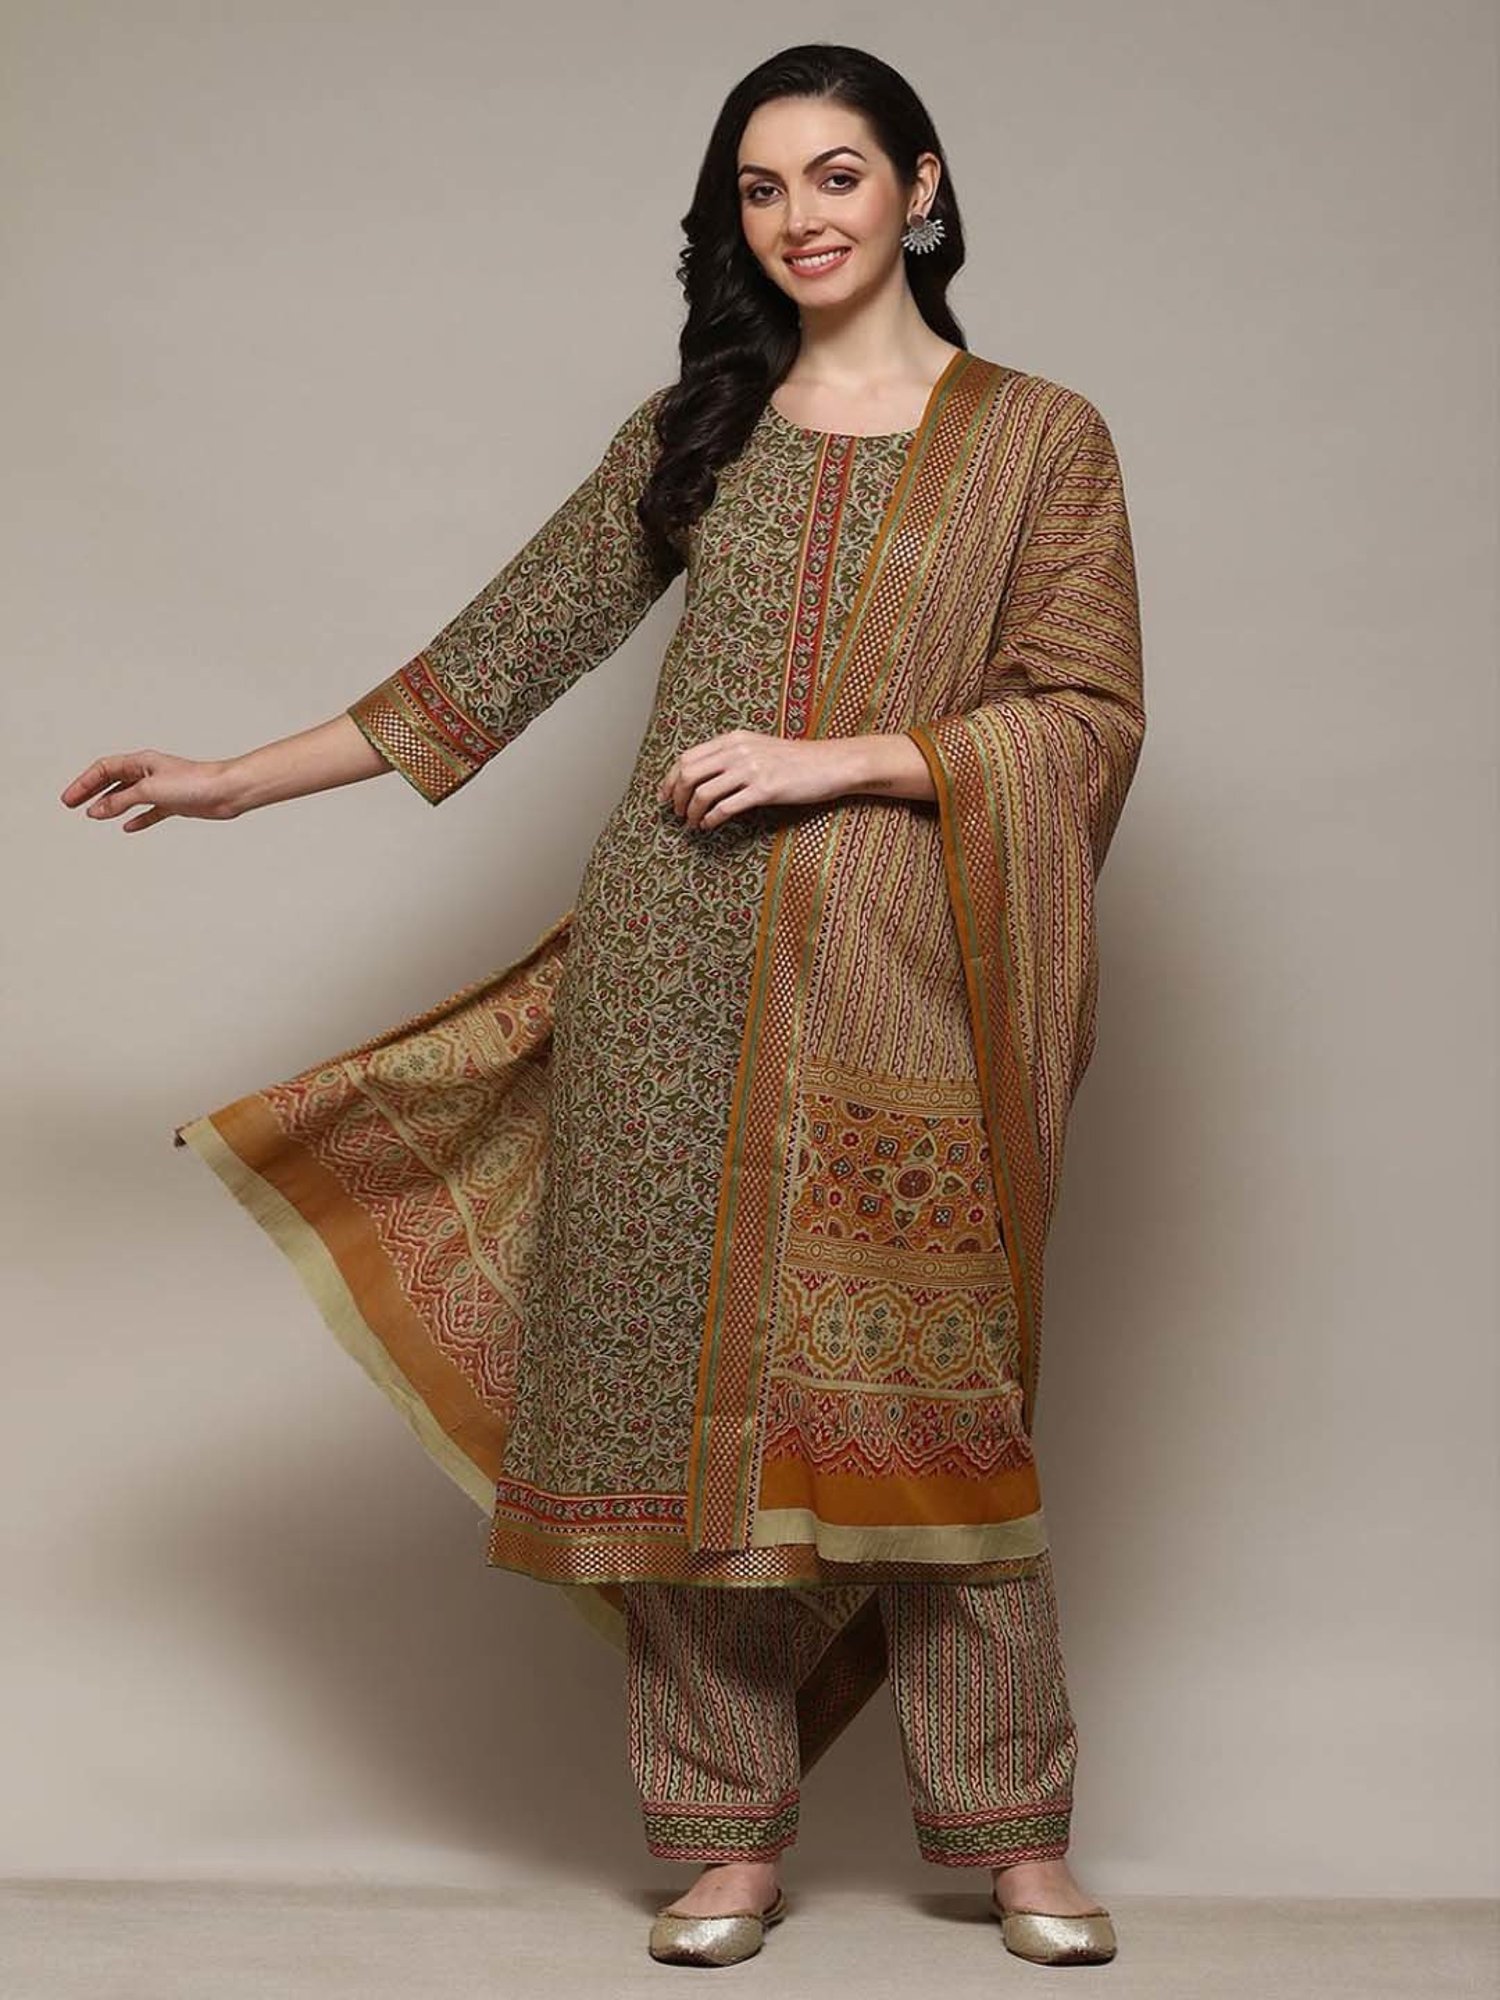 Ethnic wear: Buy ethnic wear online at best prices in India - Amazon.in |  Victorian dress, Dress materials, Dresses